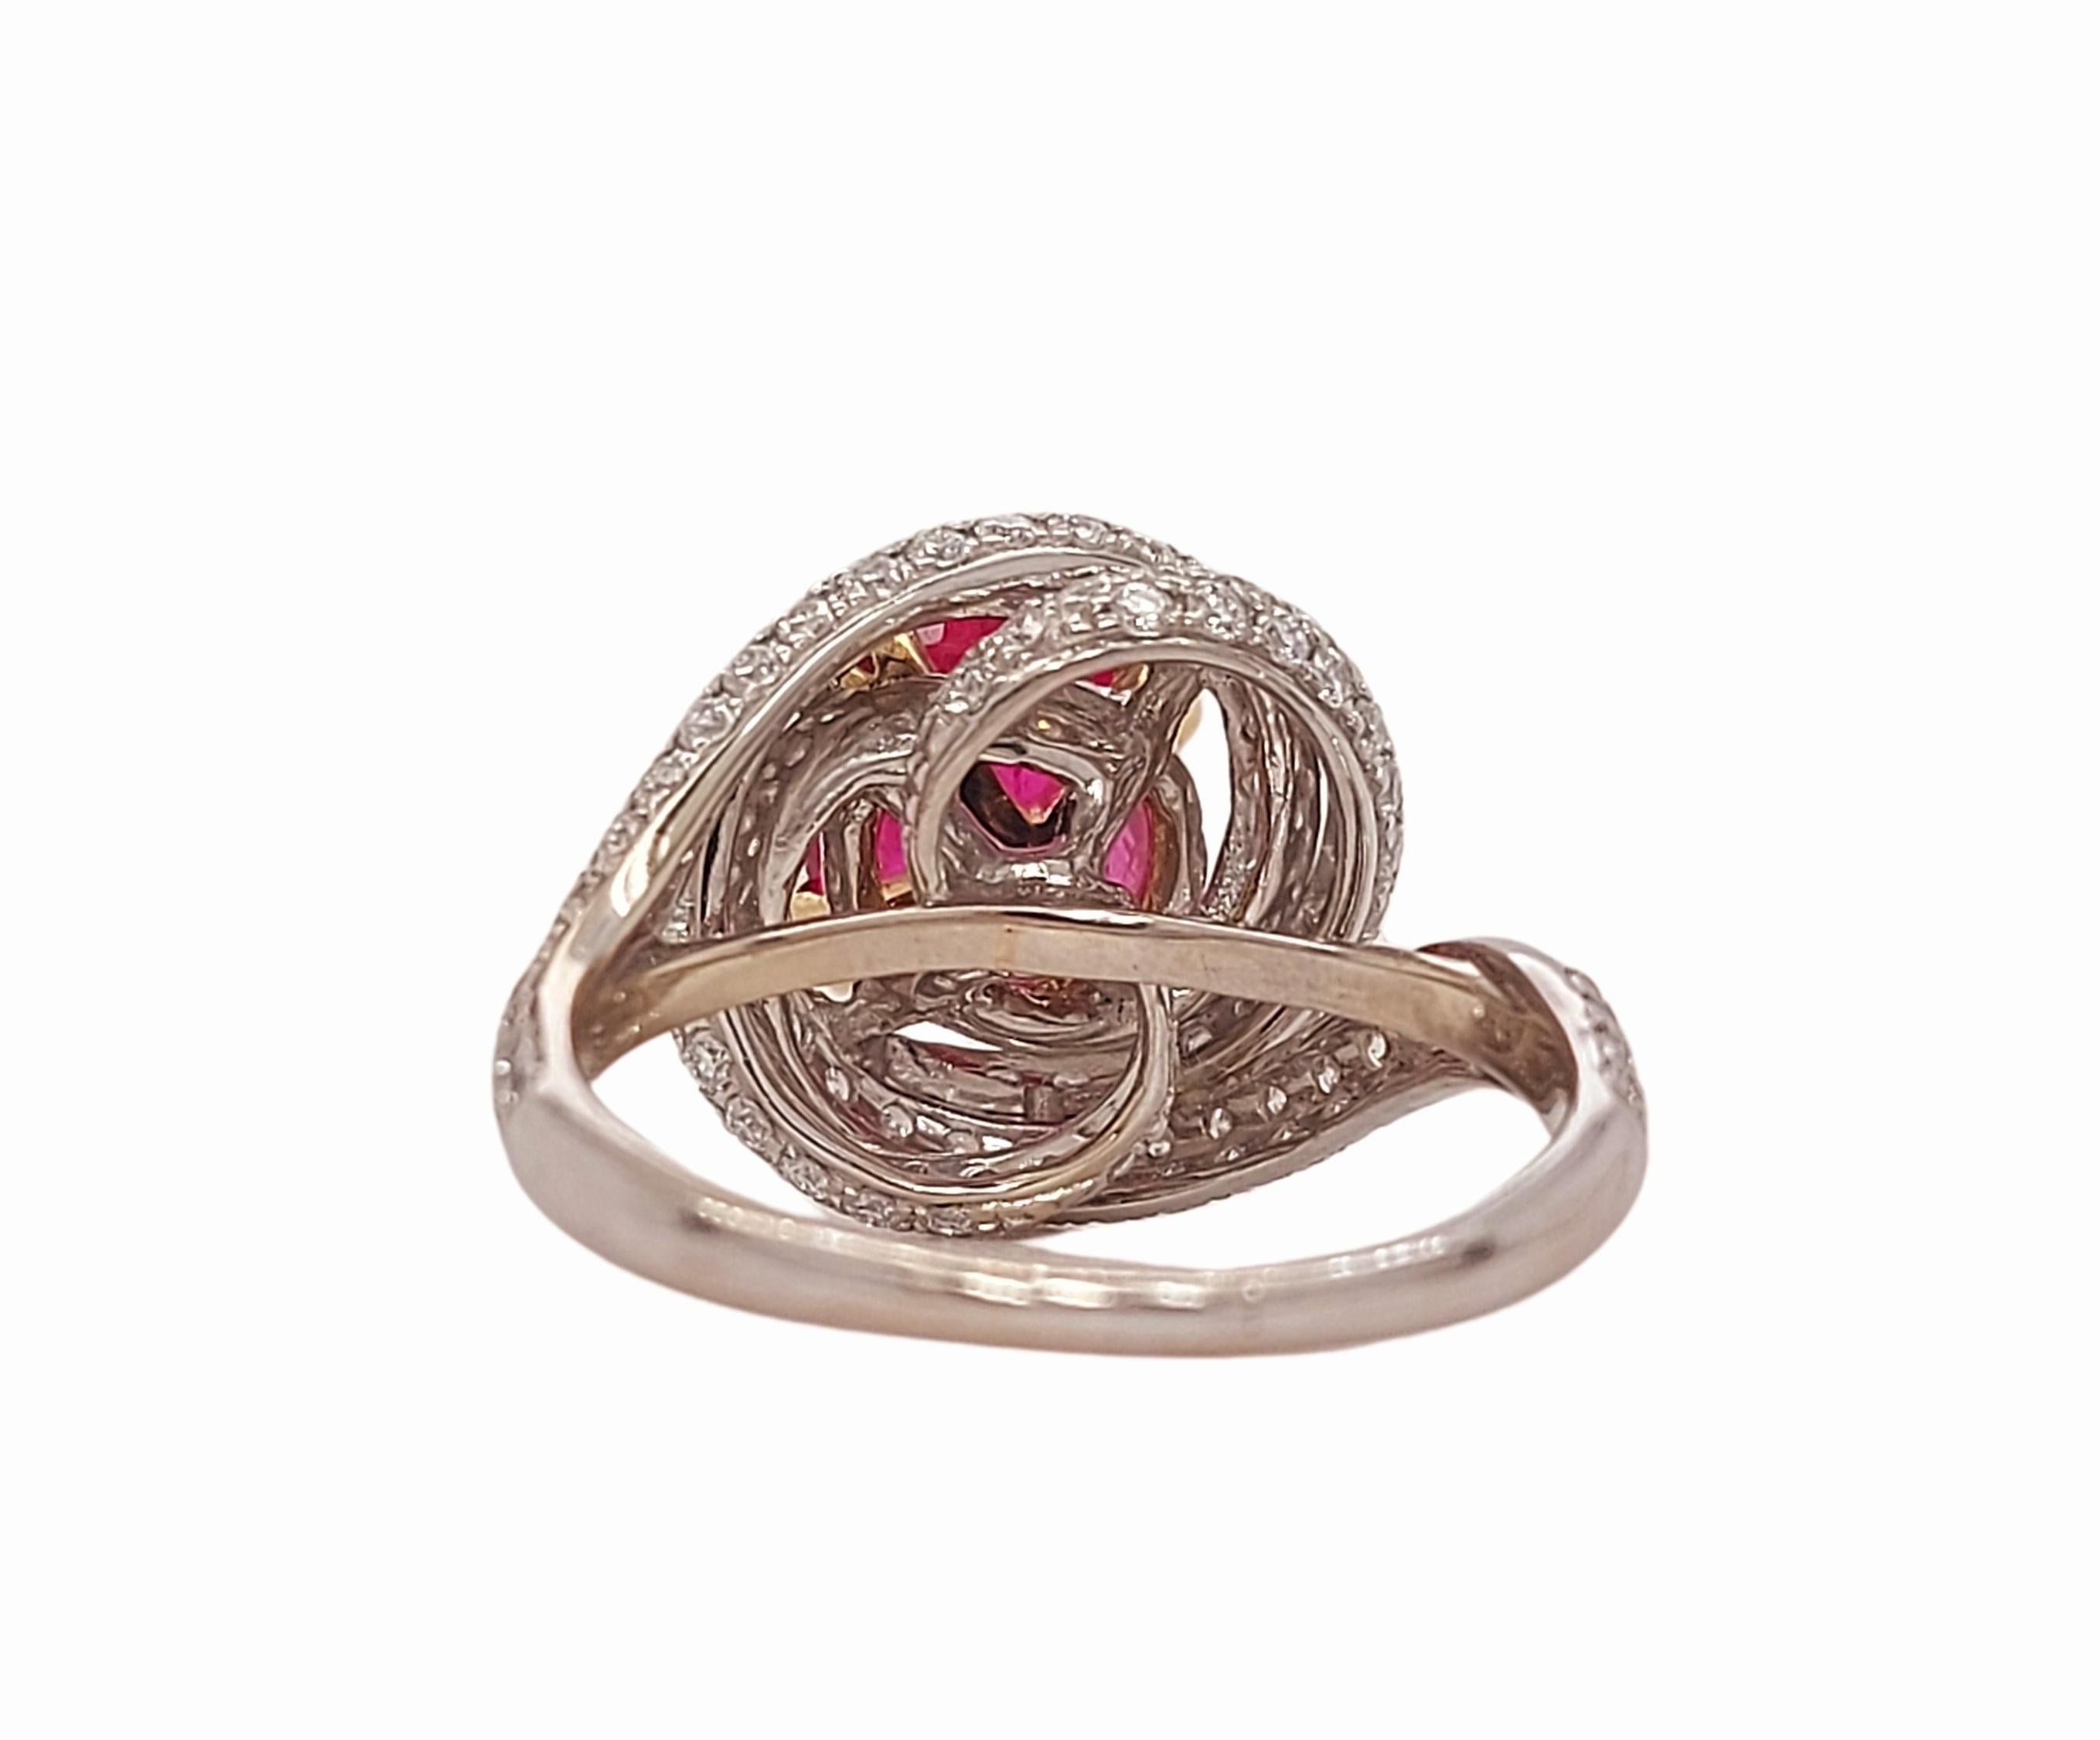 Stunning 18kt gold Ruby Diamond Ring, Comes with GRS Gem Research SwissLab Certificate

Ruby: Natural Ruby 2.08ct No indications of treatment

Diamonds: 140 diamonds

Material: 18kt white gold

Ring size: 53.5 EU / 6.75 US  ( Can be resized for